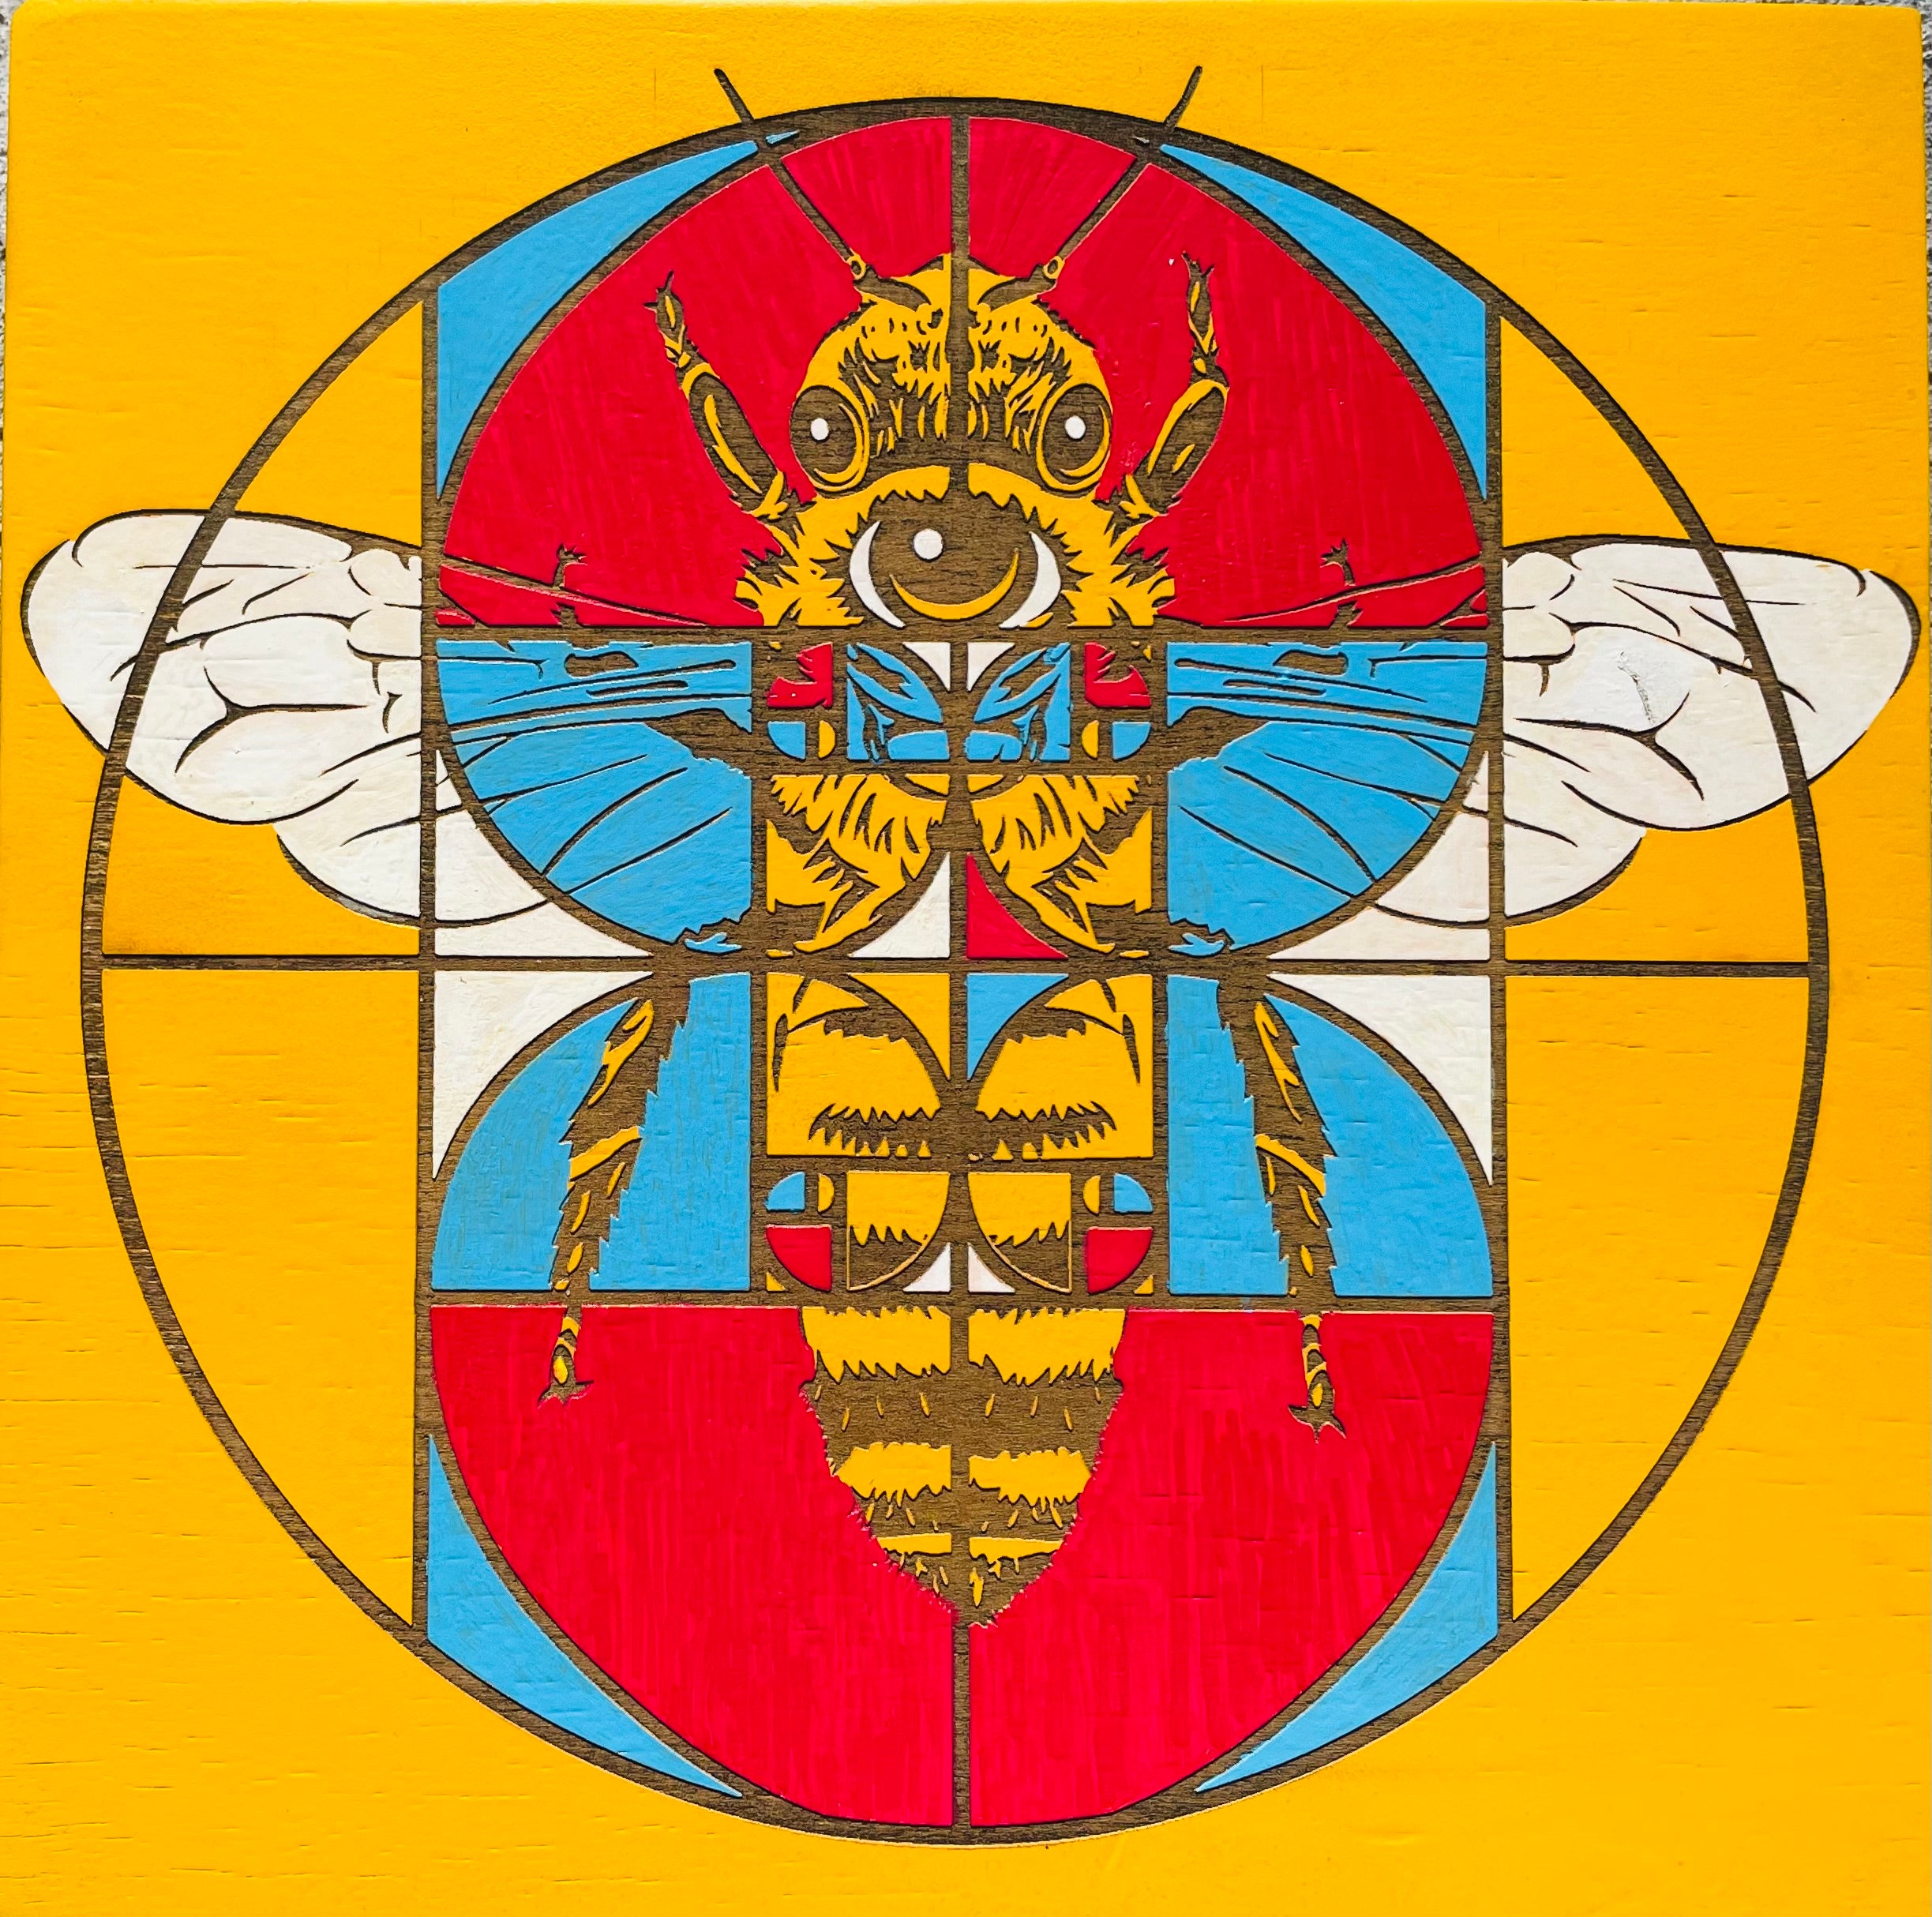 Large 10x10 Golden Ratio Bee Engraving - Primary Colors